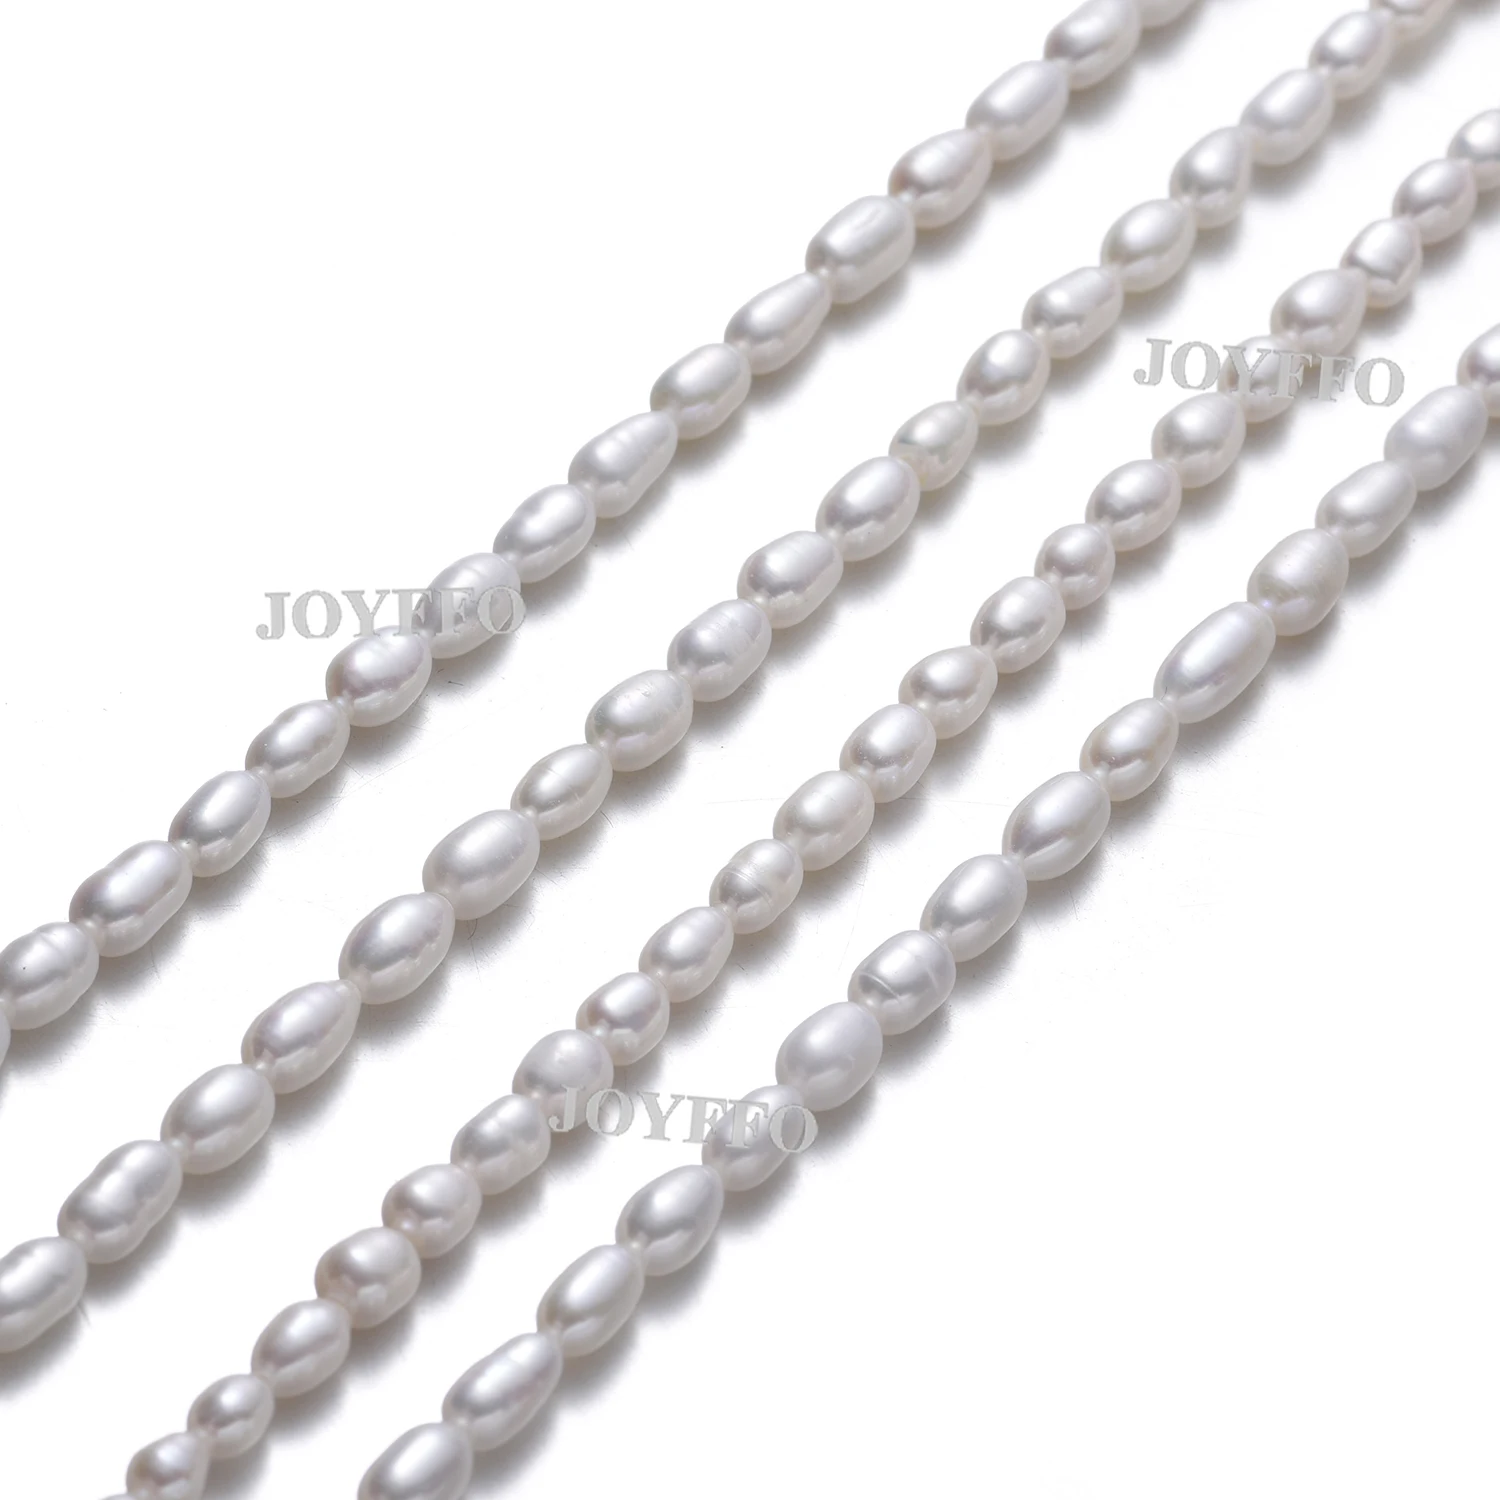 

Zhejiang Wholesale 4-5mm natural loose pearl beads with holes for bracelet and necklace Cheap Loose pearls